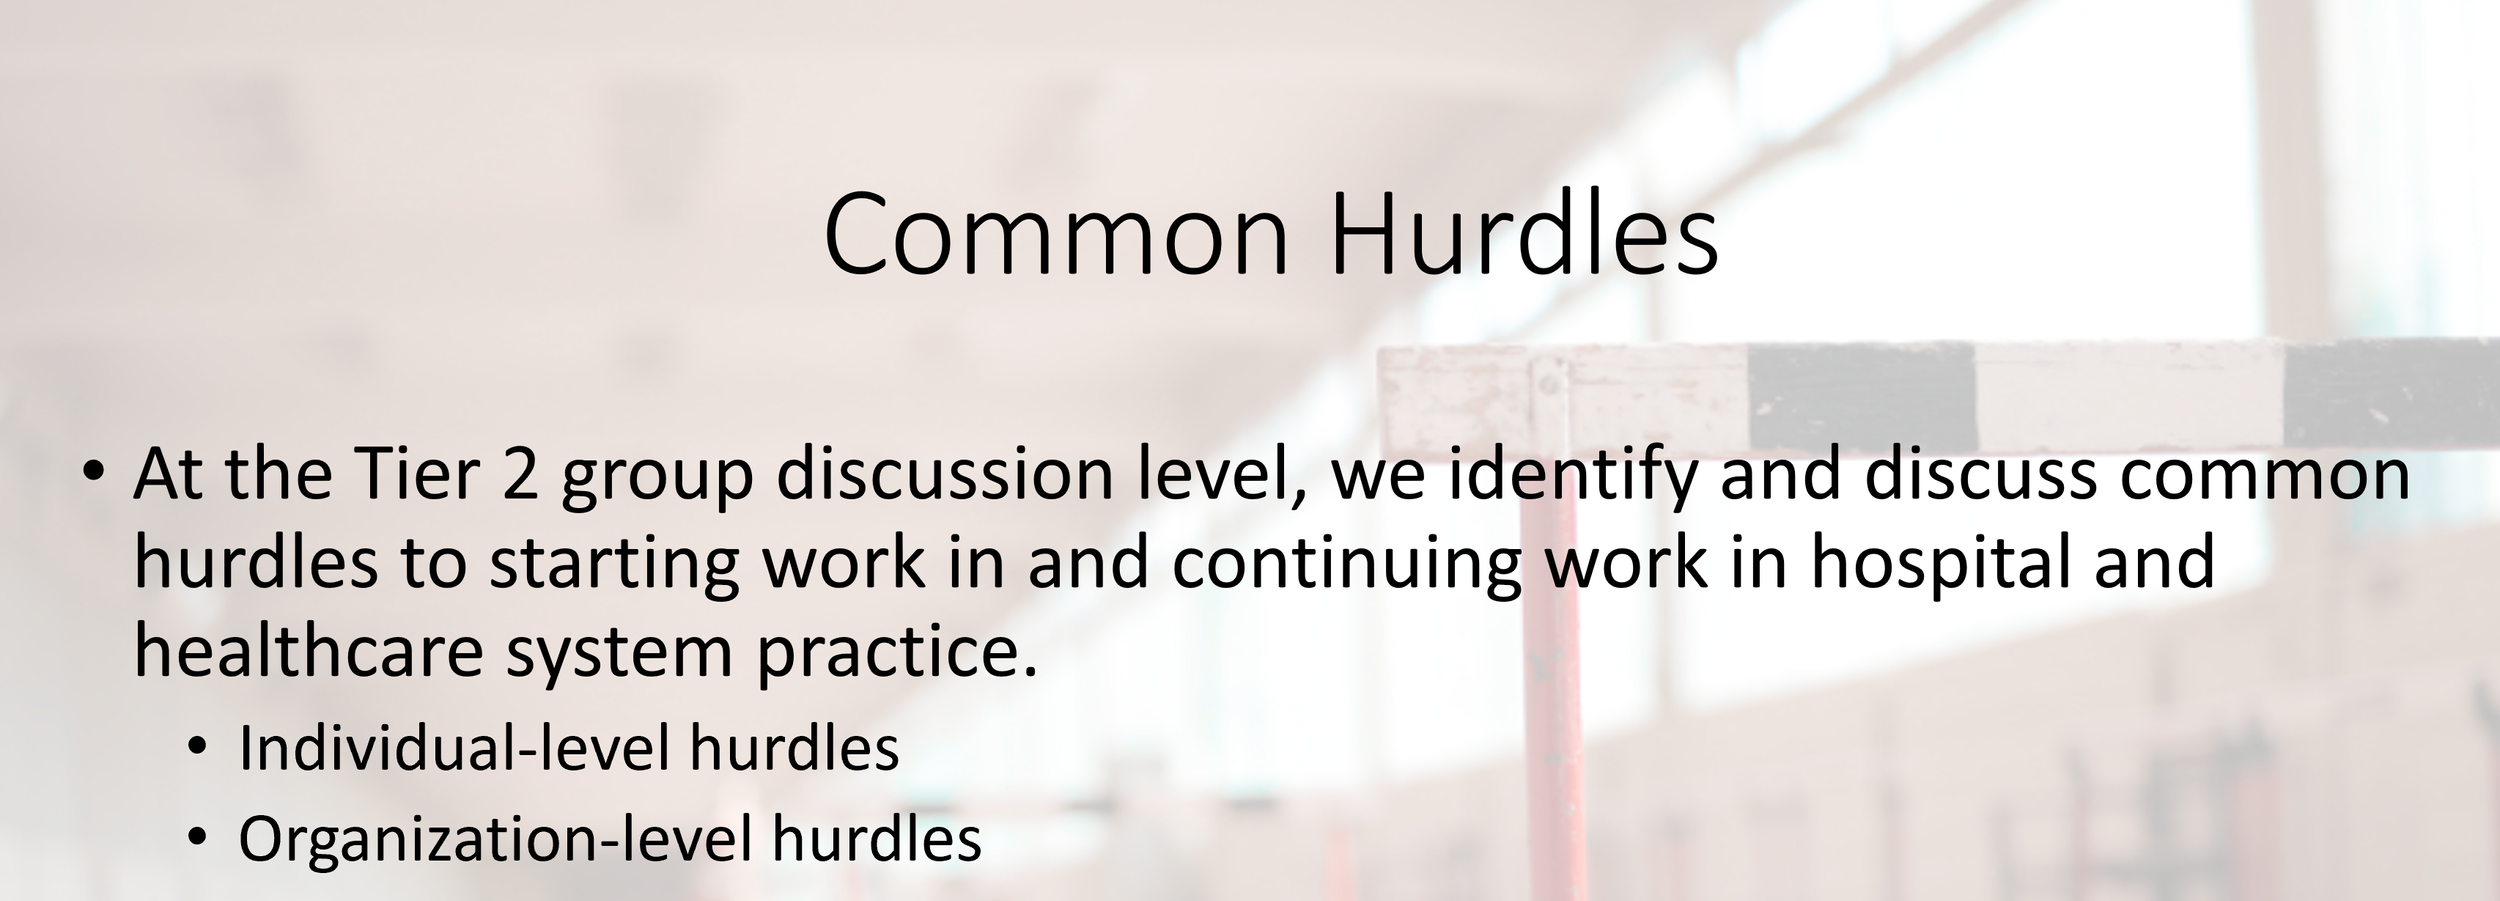 How 2 Hire_common hurdles slide screenshot cropped.png